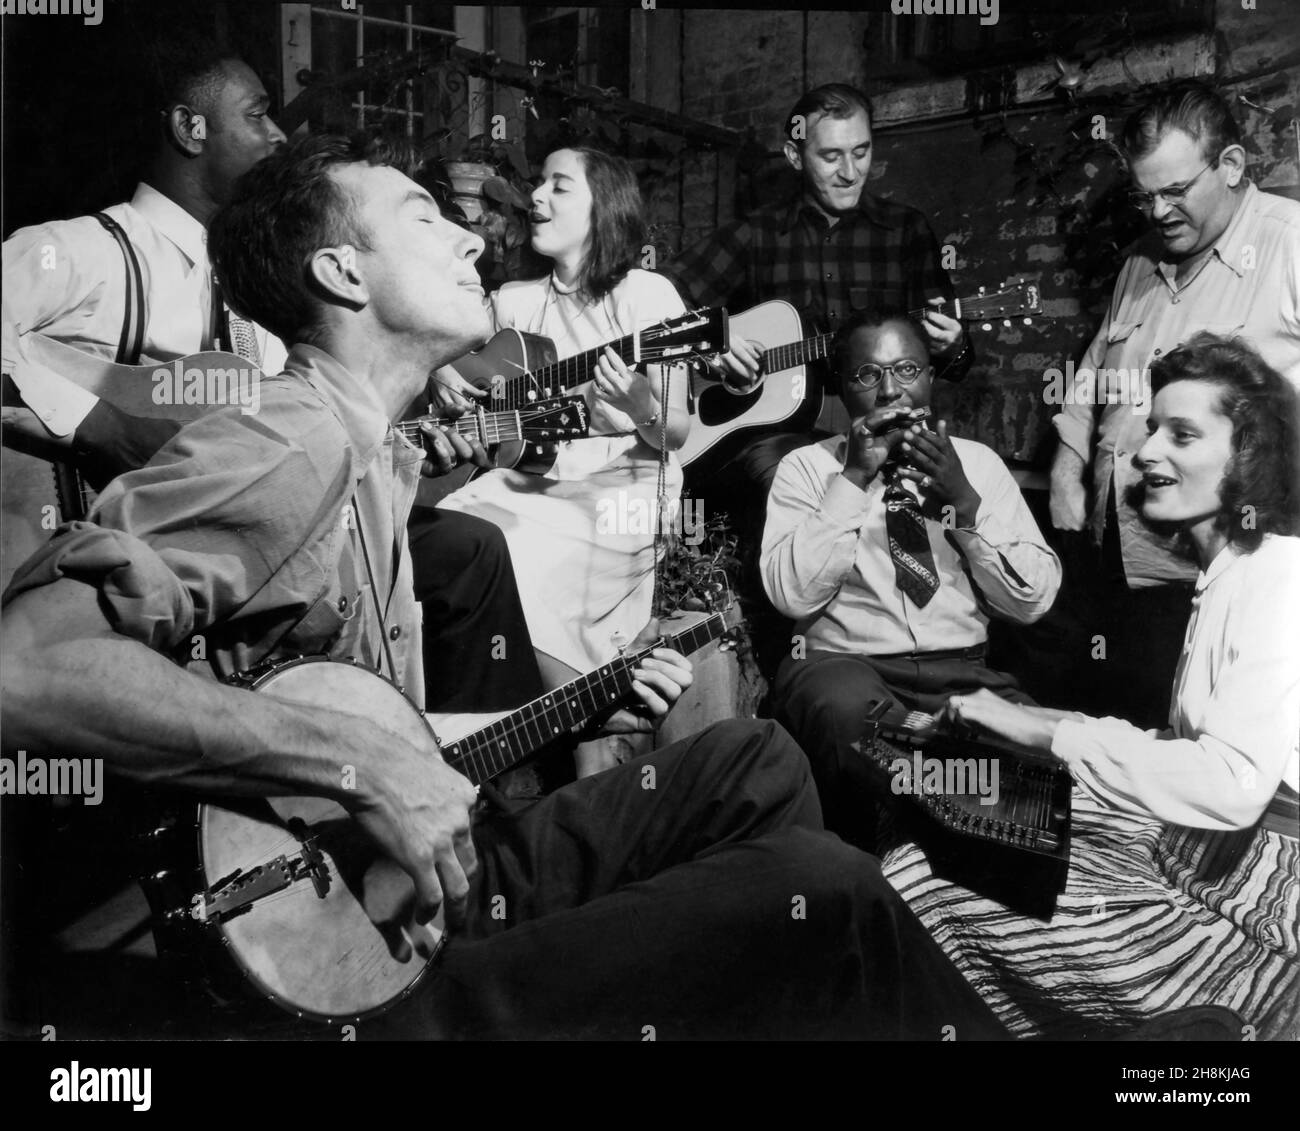 Pete Seeger playing banjo along with other musicians circa 1950s. Stock Photo